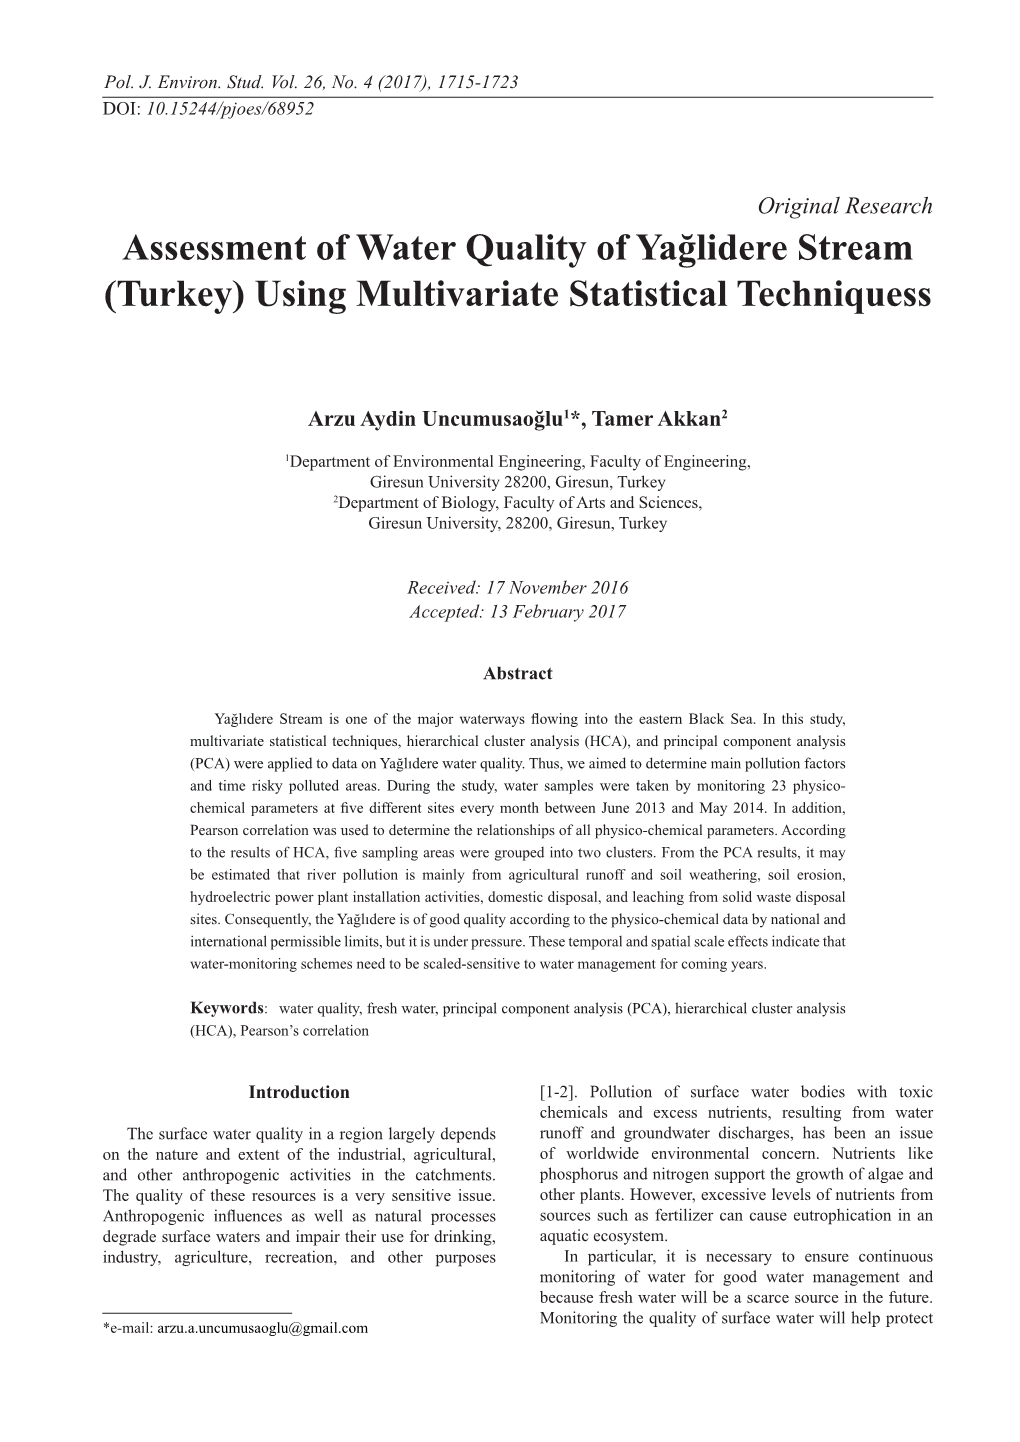 Assessment of Water Quality of Yağlidere Stream (Turkey) Using Multivariate Statistical Techniquess